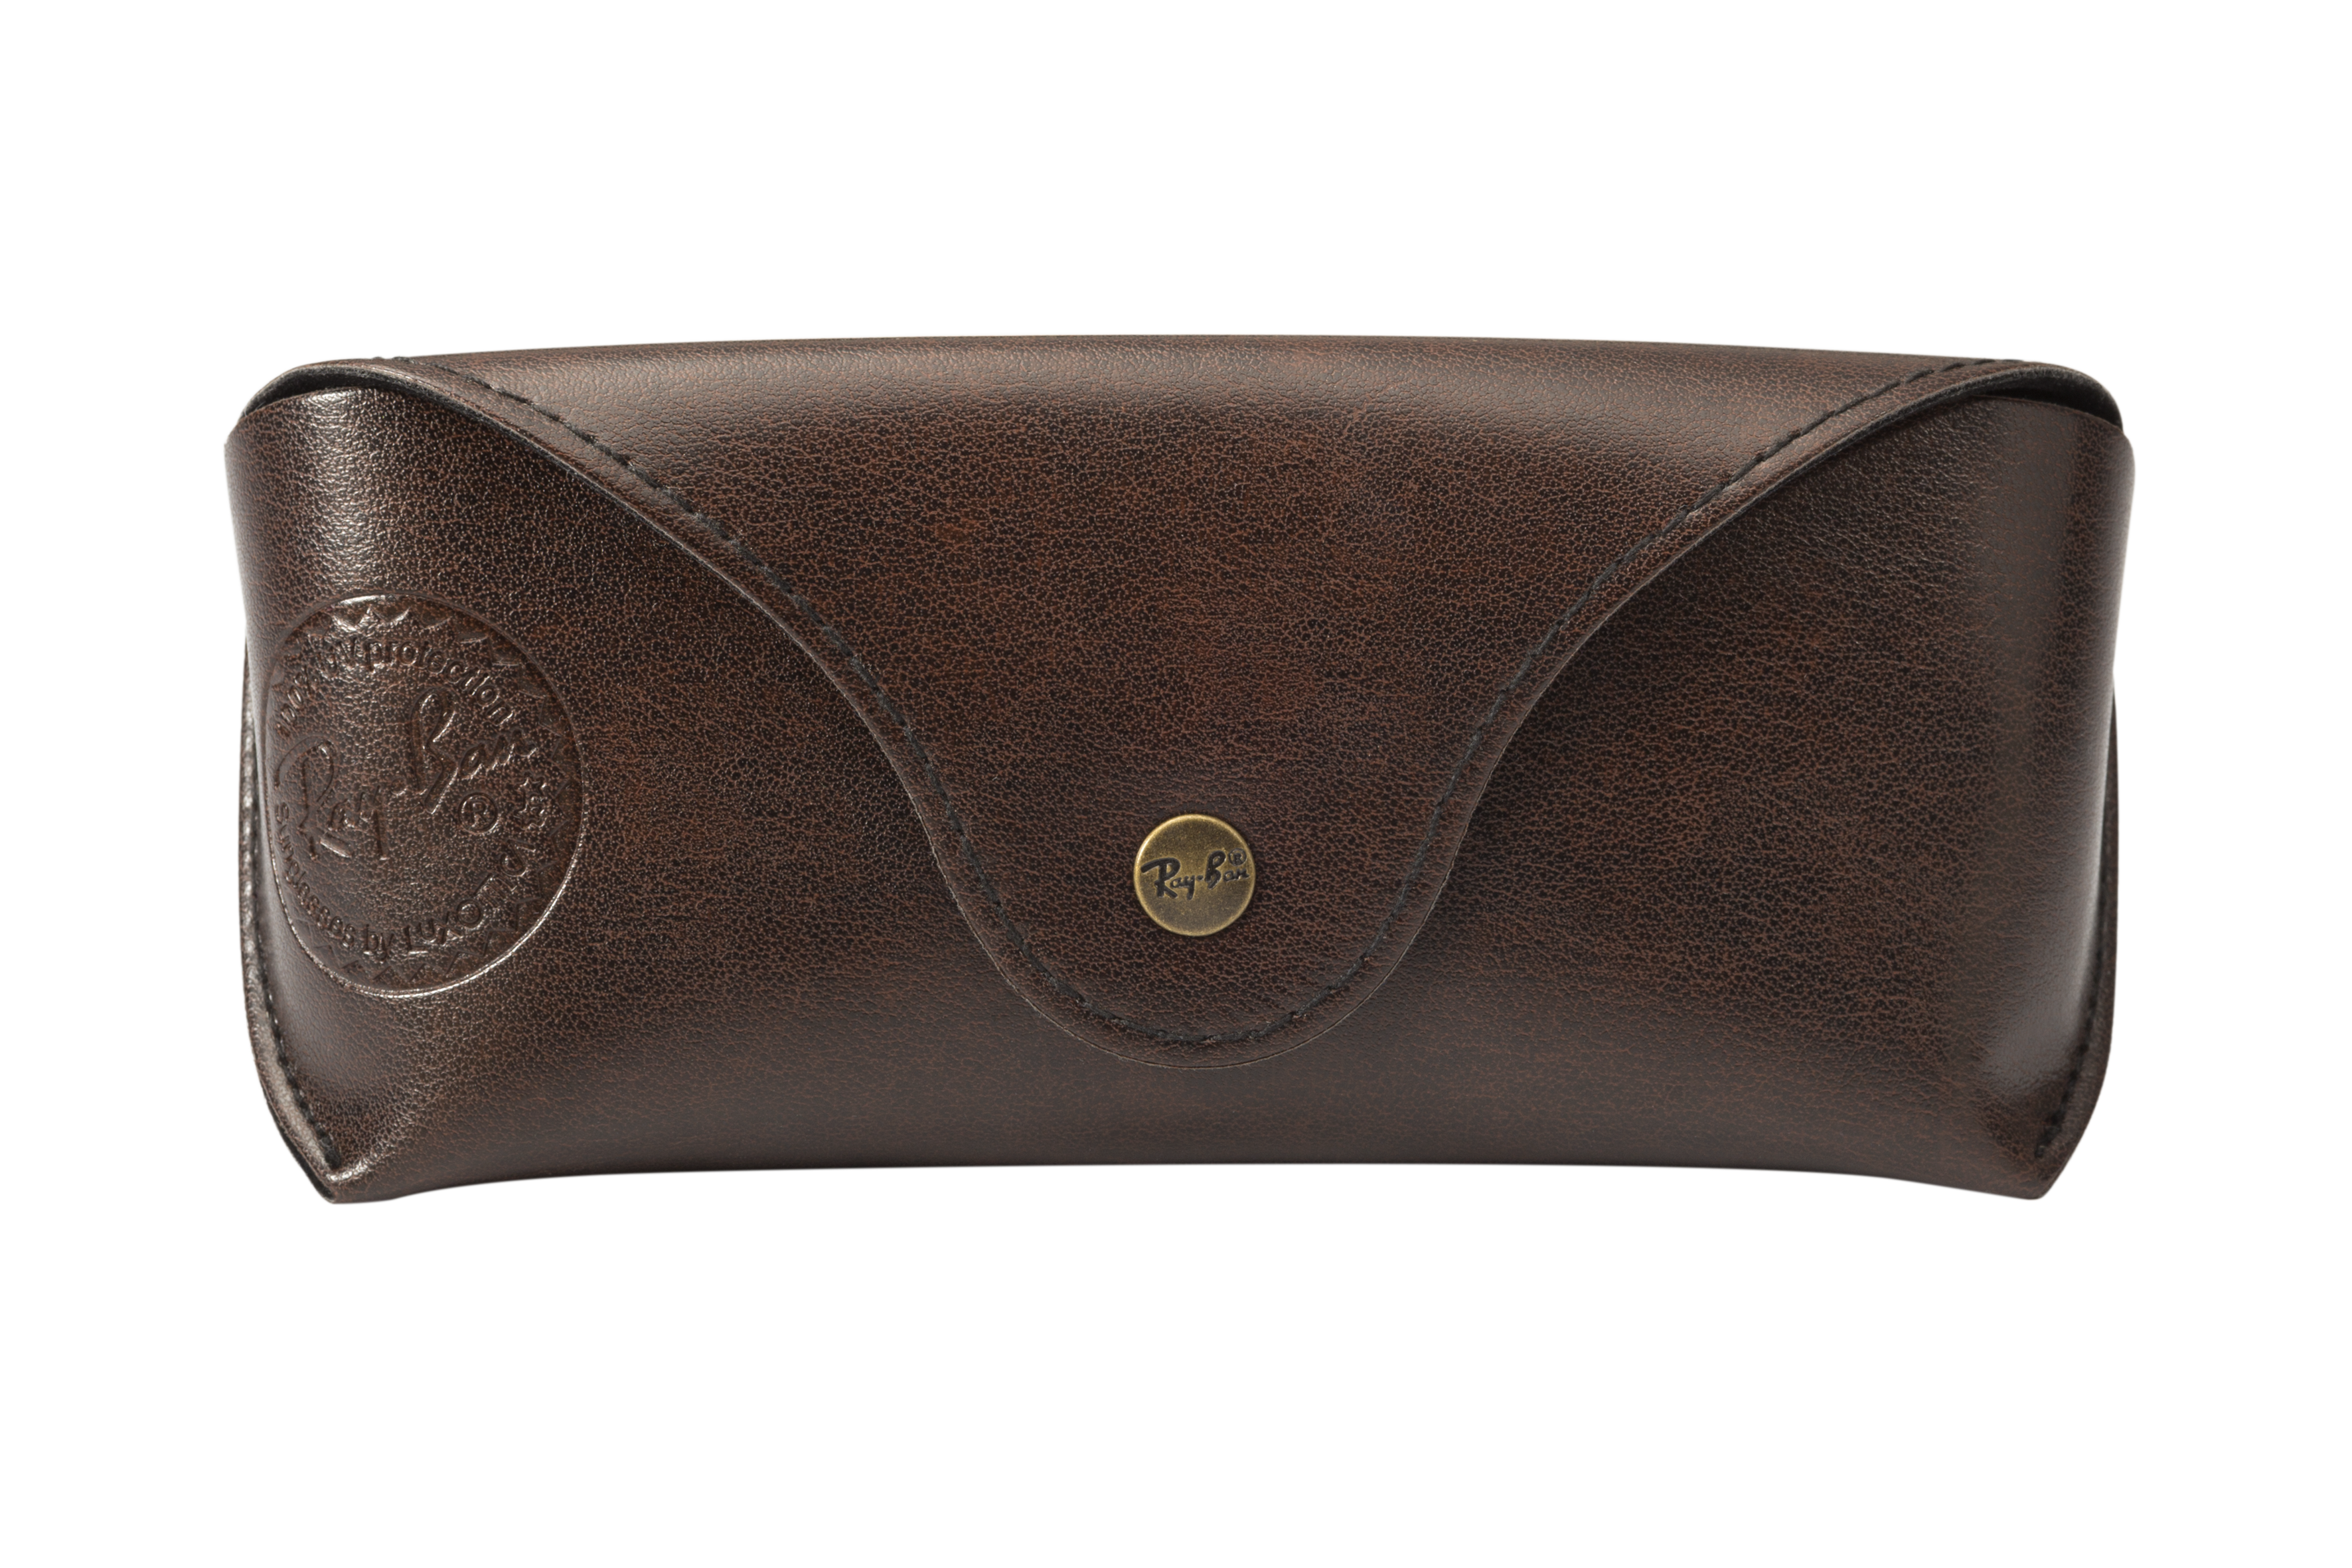 ray ban sunglasses case brown